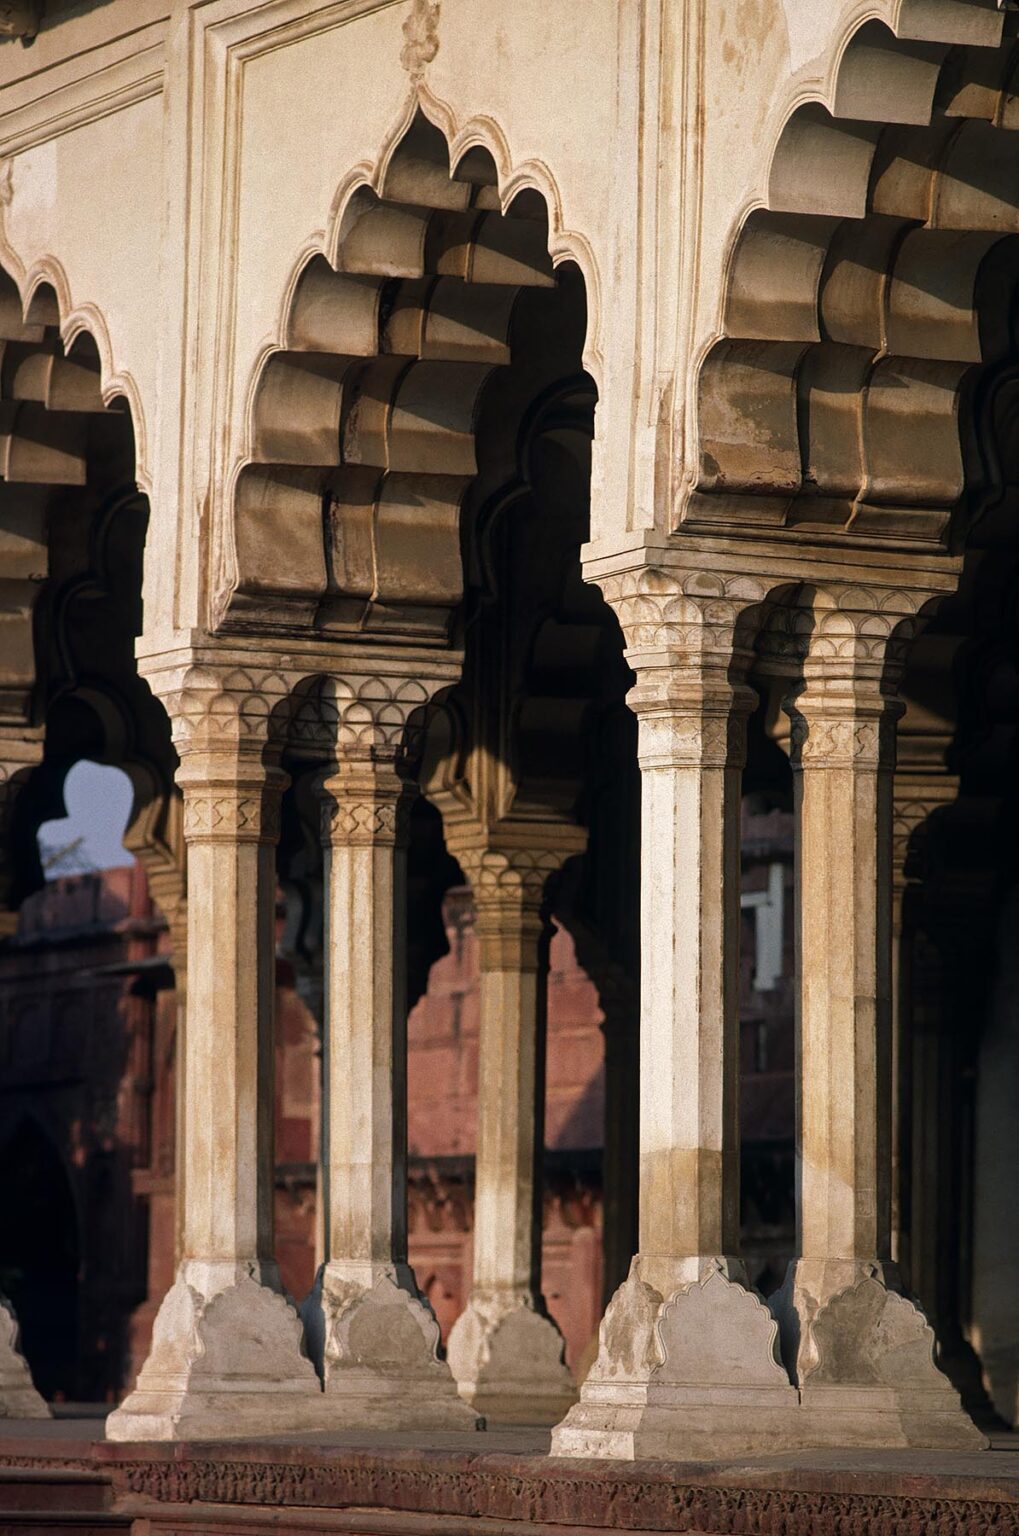 Detail of ISLAMIC ARCHES at AGRA FORT, built by the Mughal emperors in the 1500's - AGRA, INDIA